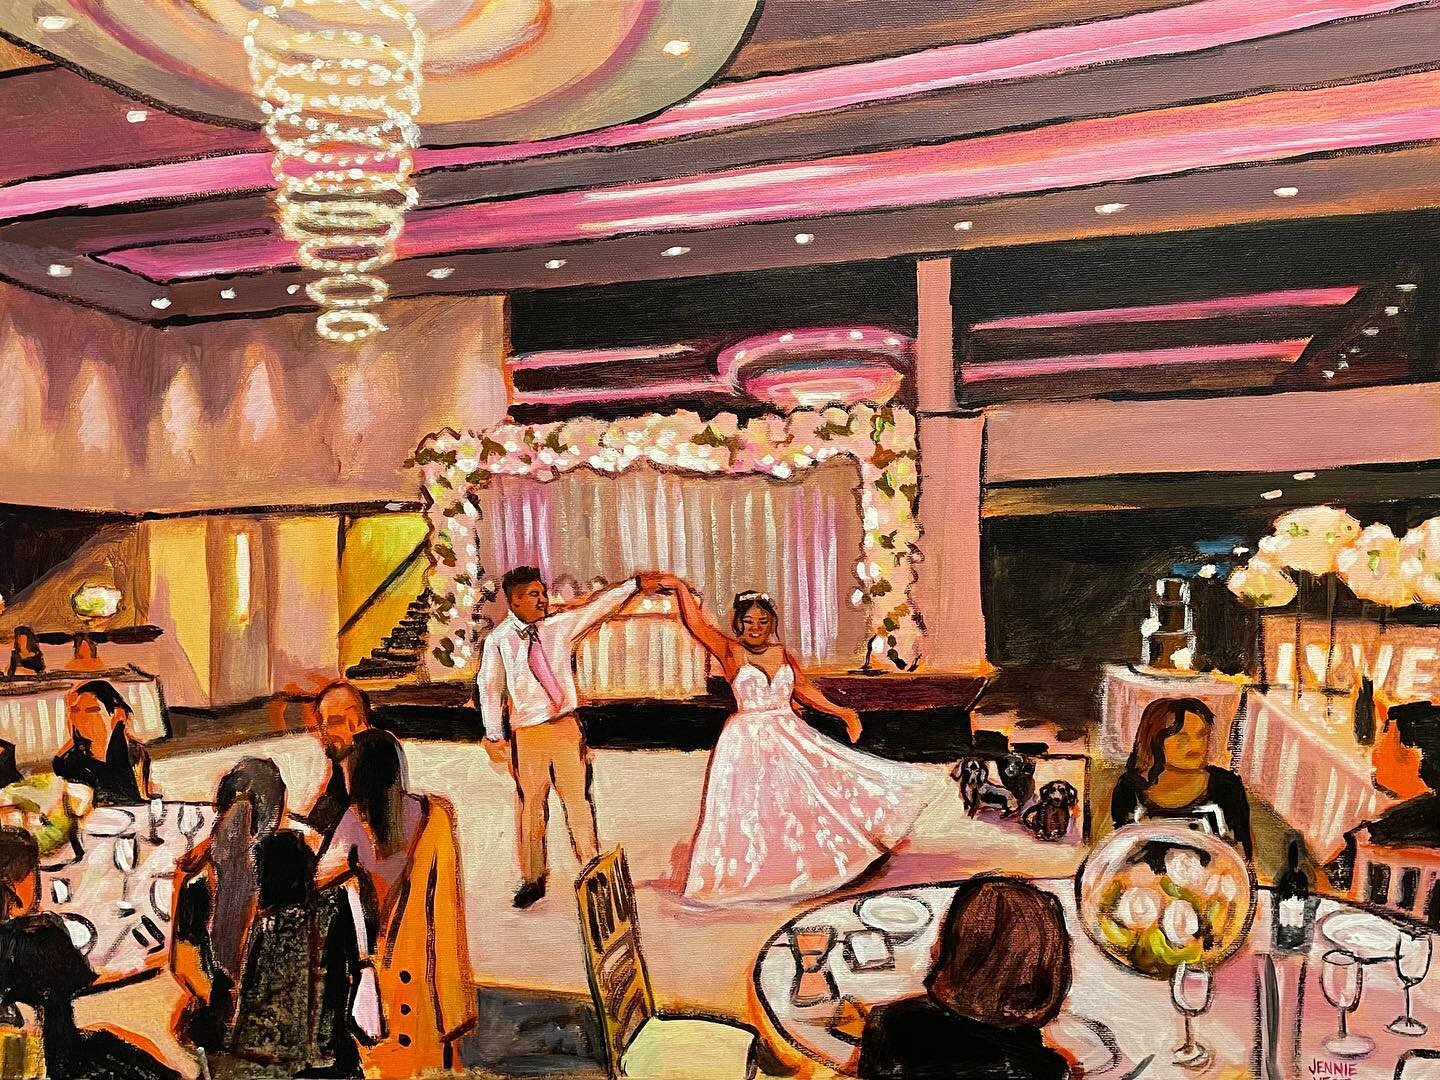 My first wedding of 2023 was lovely. I was challenged by pink neon lighting that washed over the entire room, but I think it gave the painting a really interesting vibe. The couple was very fun, so I&rsquo;m glad I caught this dynamic pose during the